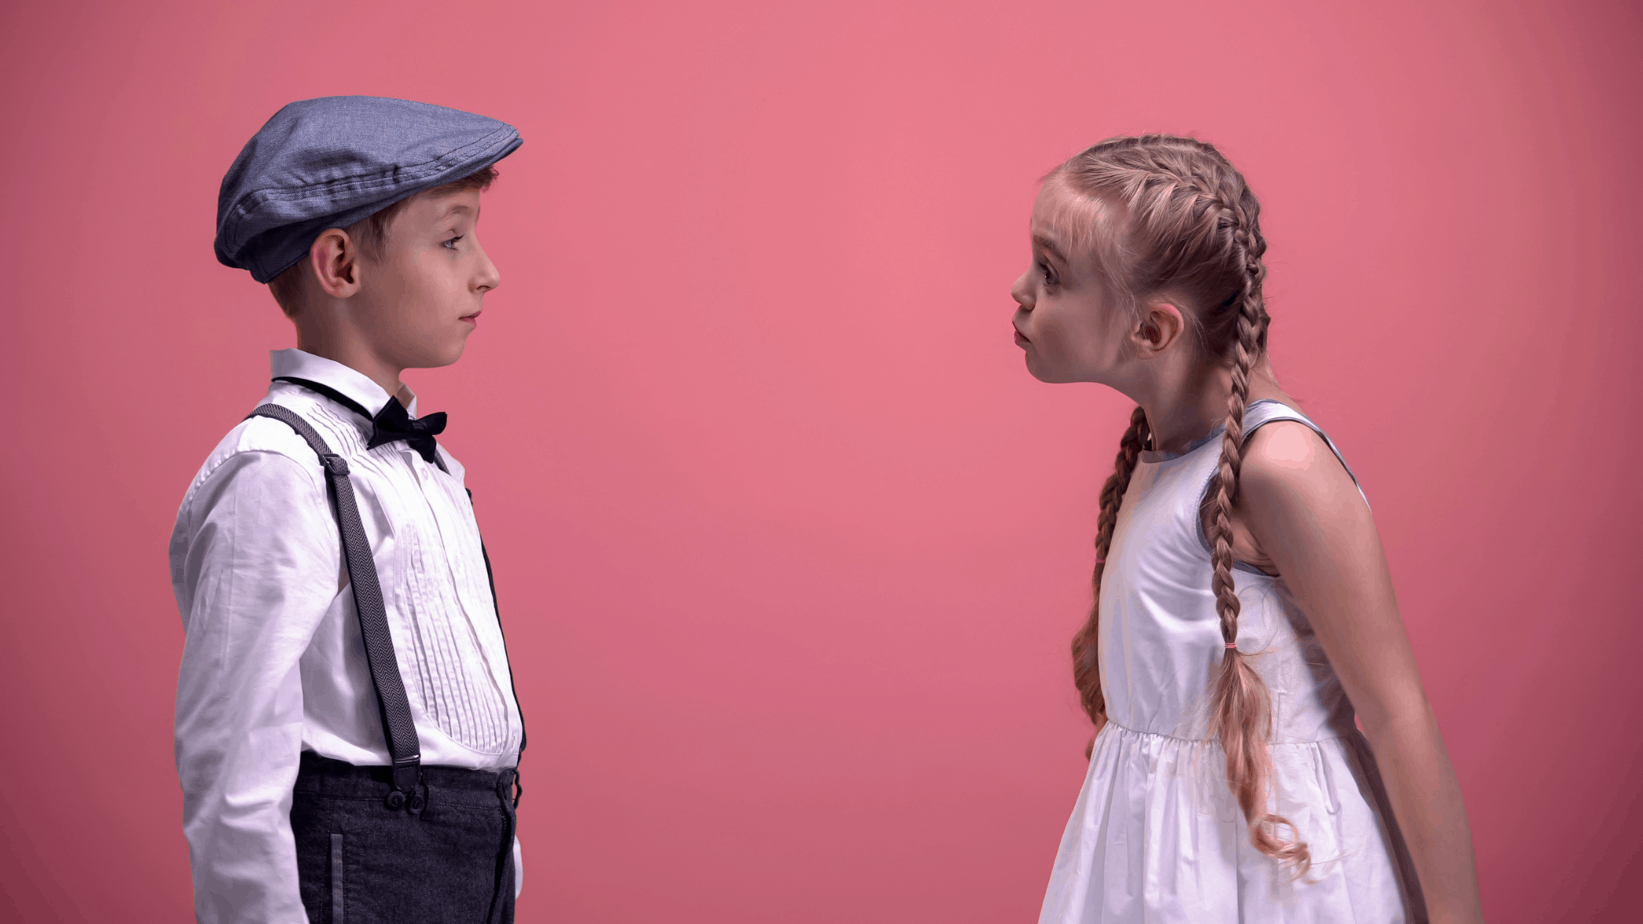 Image of a young boy and a young girl discussing something serious.